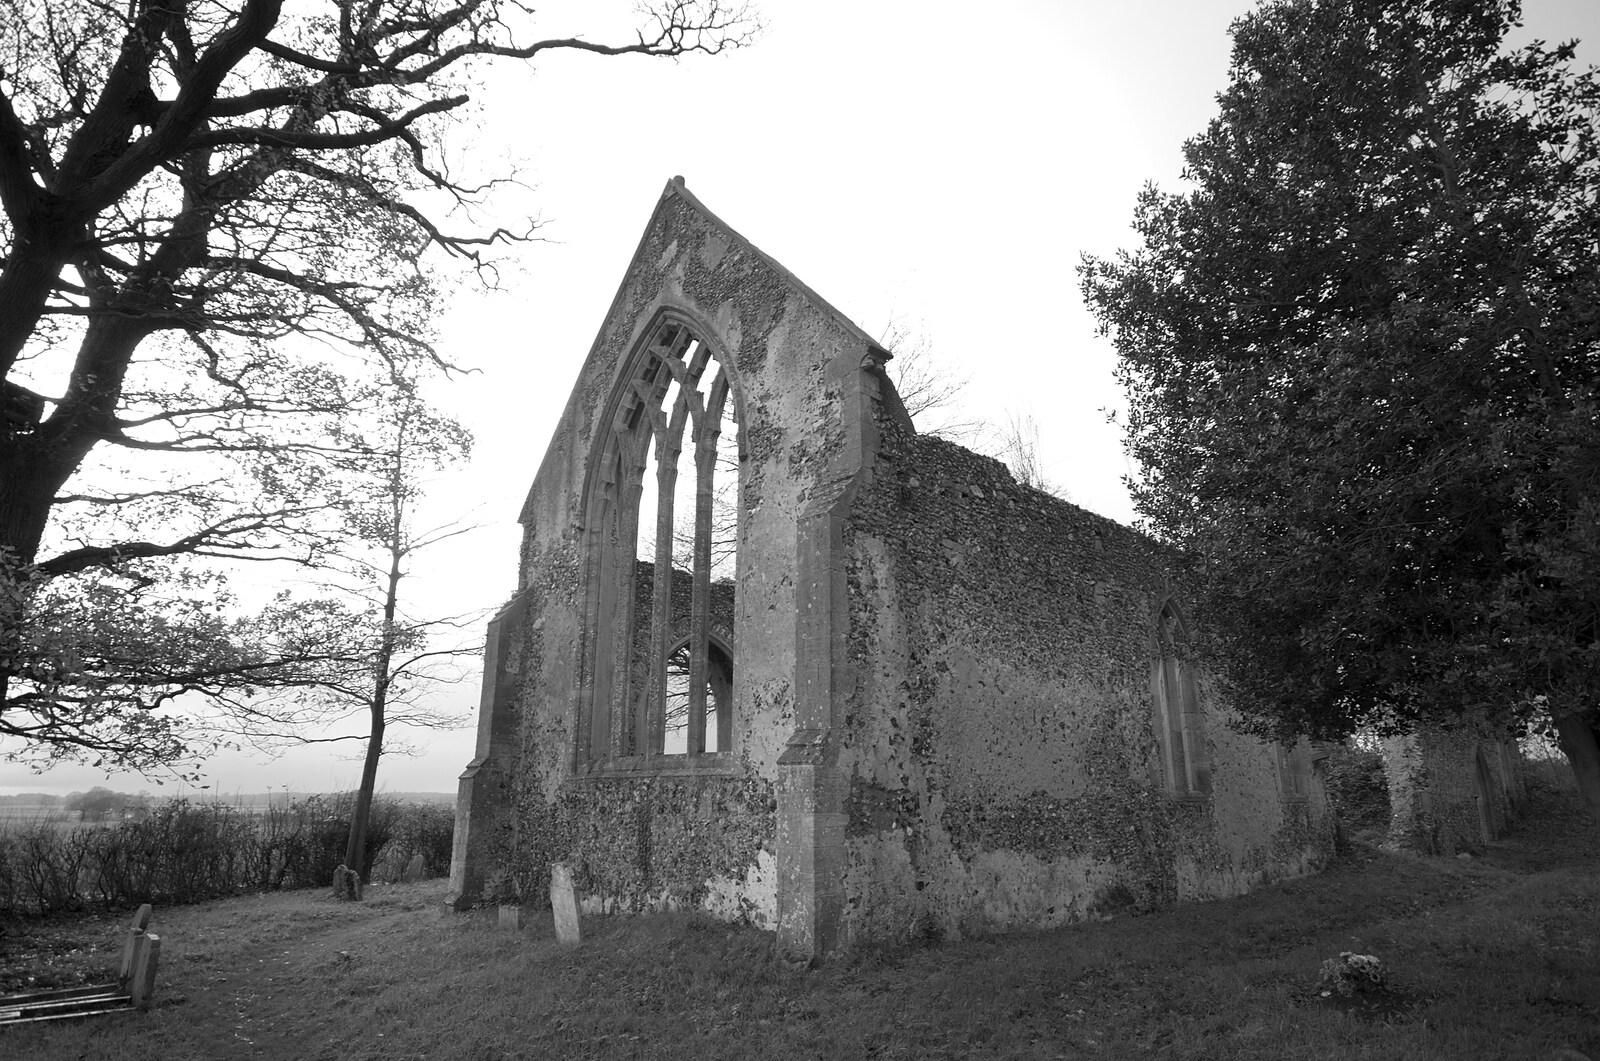 The ruins of St. Mary, Tivetshall from Fred in Amandines, and The Derelict Church of St. Mary, Tivetshall, Norfolk - 13th December 2009